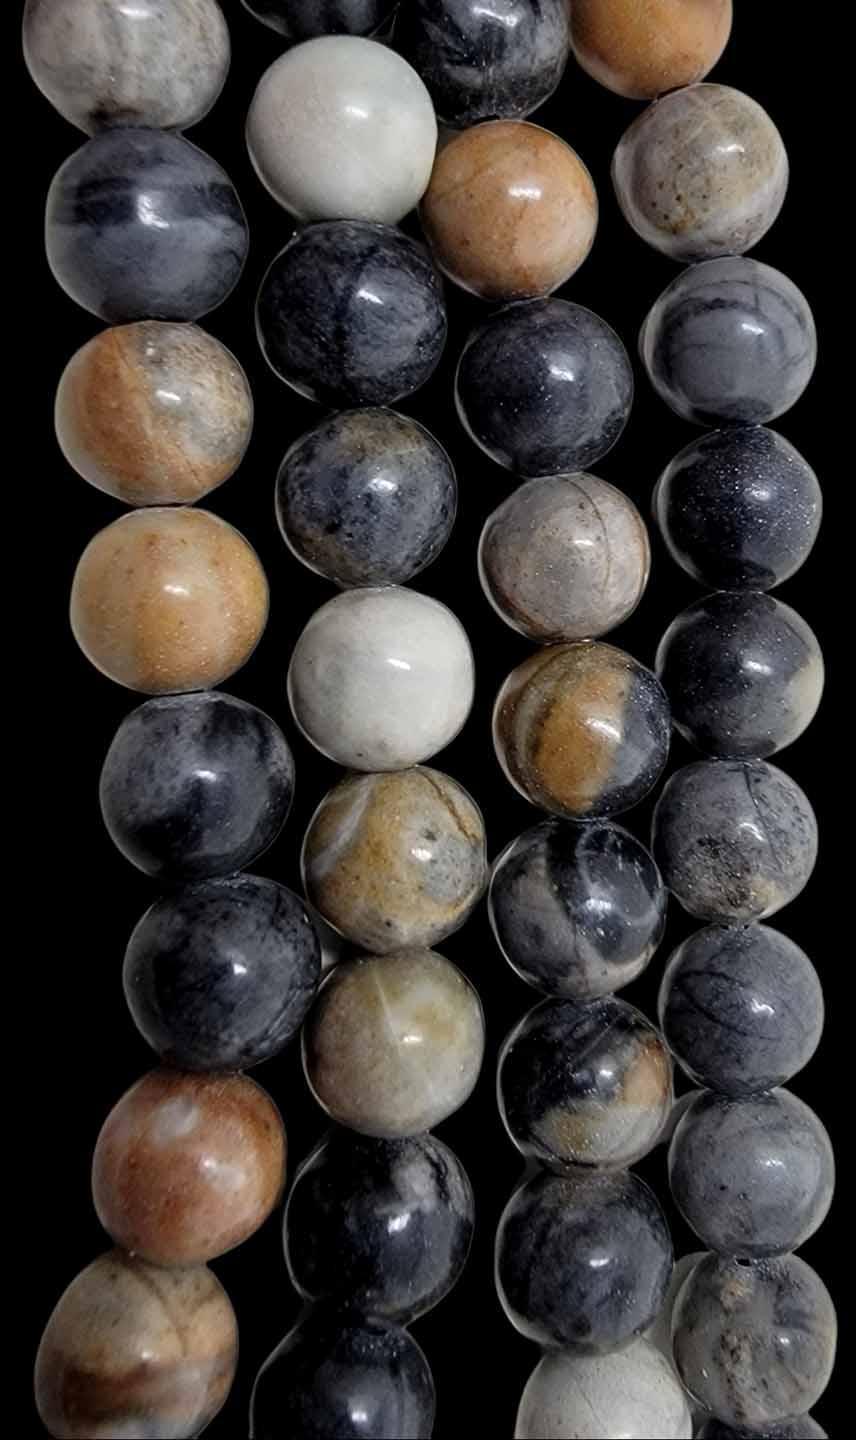 Picasso Jasper Marble 8mm Lapidary Bead 15 Inch Strand! - LapidaryCentral